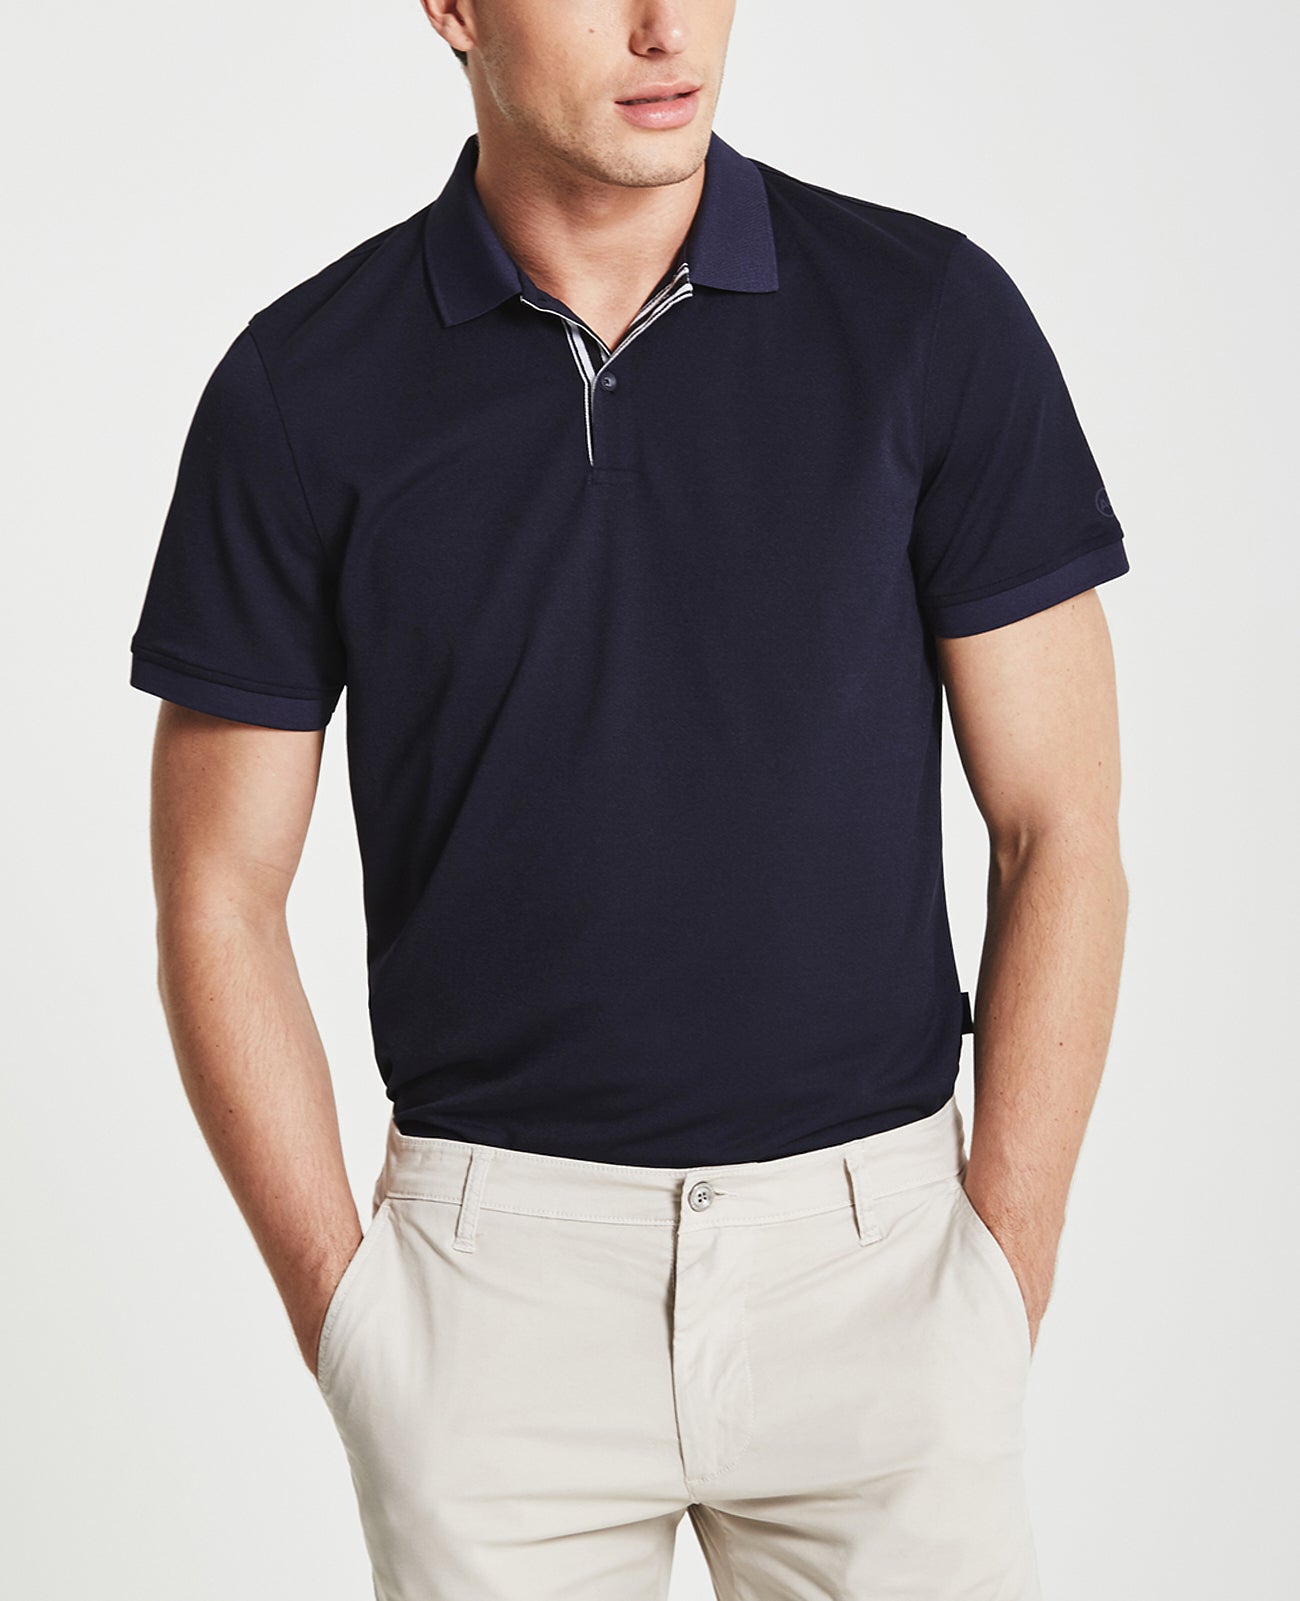 Berrian Polo Naval Blue Green Label Collection Men Tops Photo 1